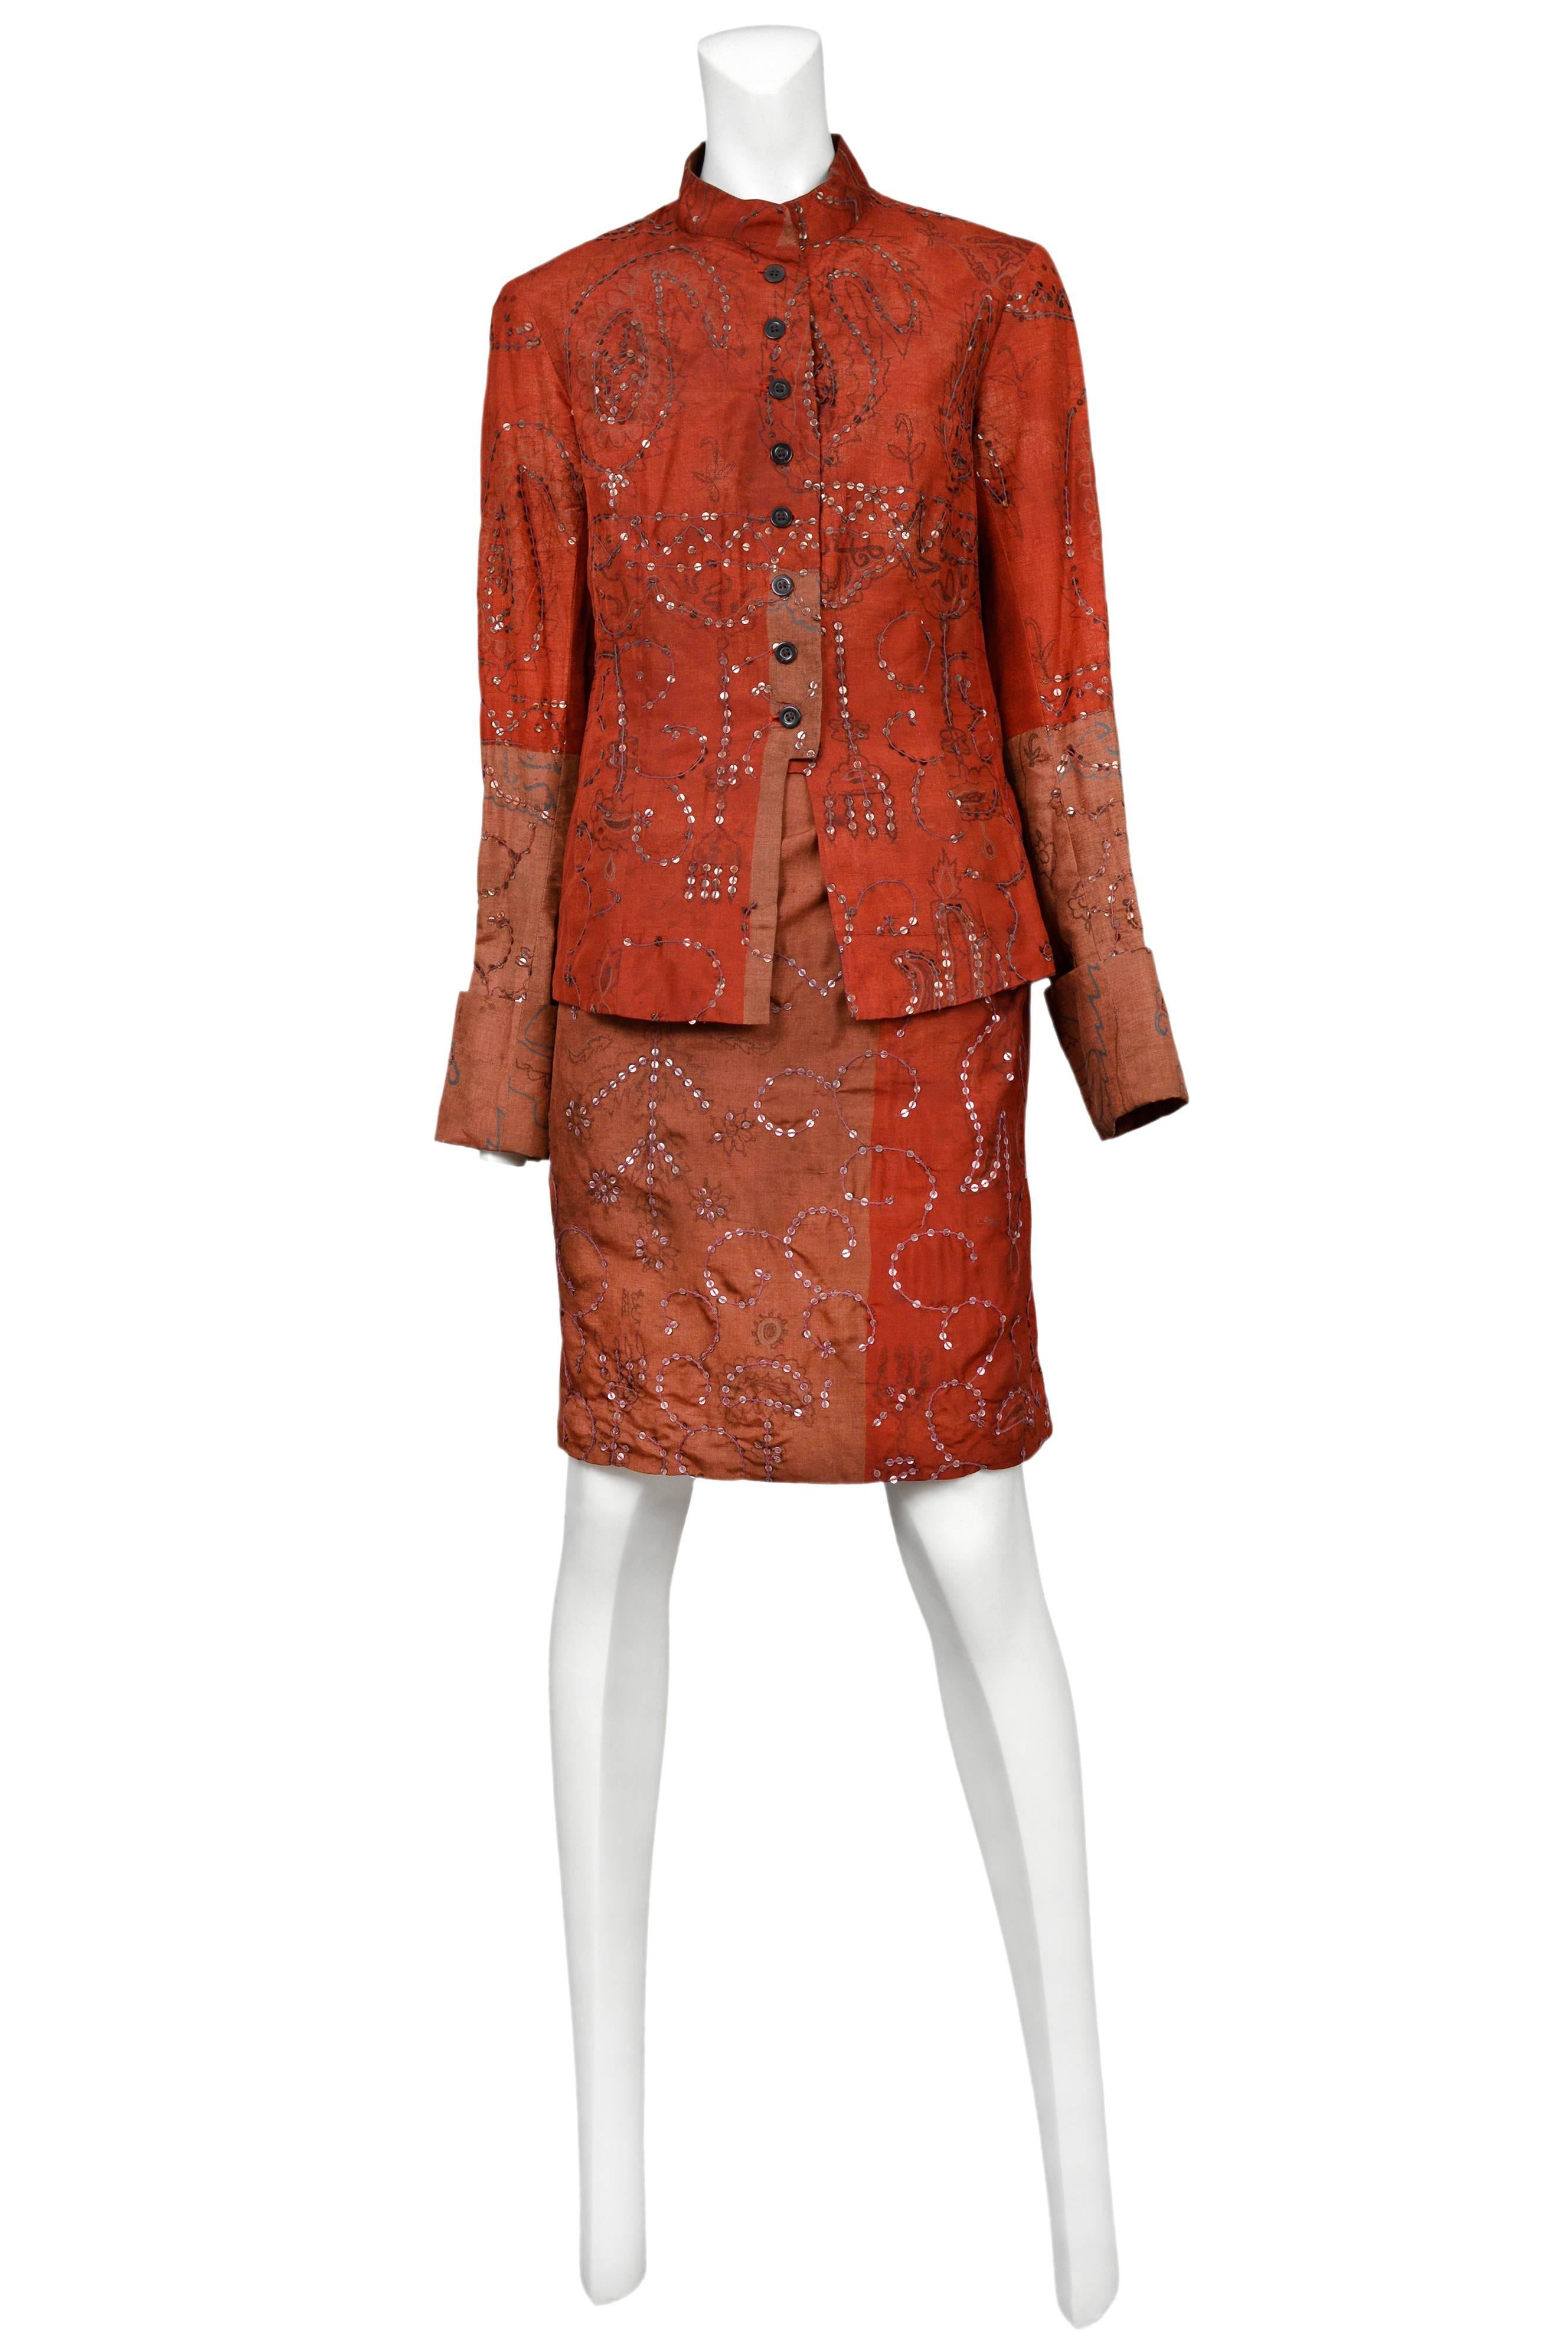 Vintage Dries Van Noten burgundy skirt suit featuring a button front entrance, duotone patchwork, a sari style knee length skirt and allover sequin embroidery.
Please inquire for additional images.